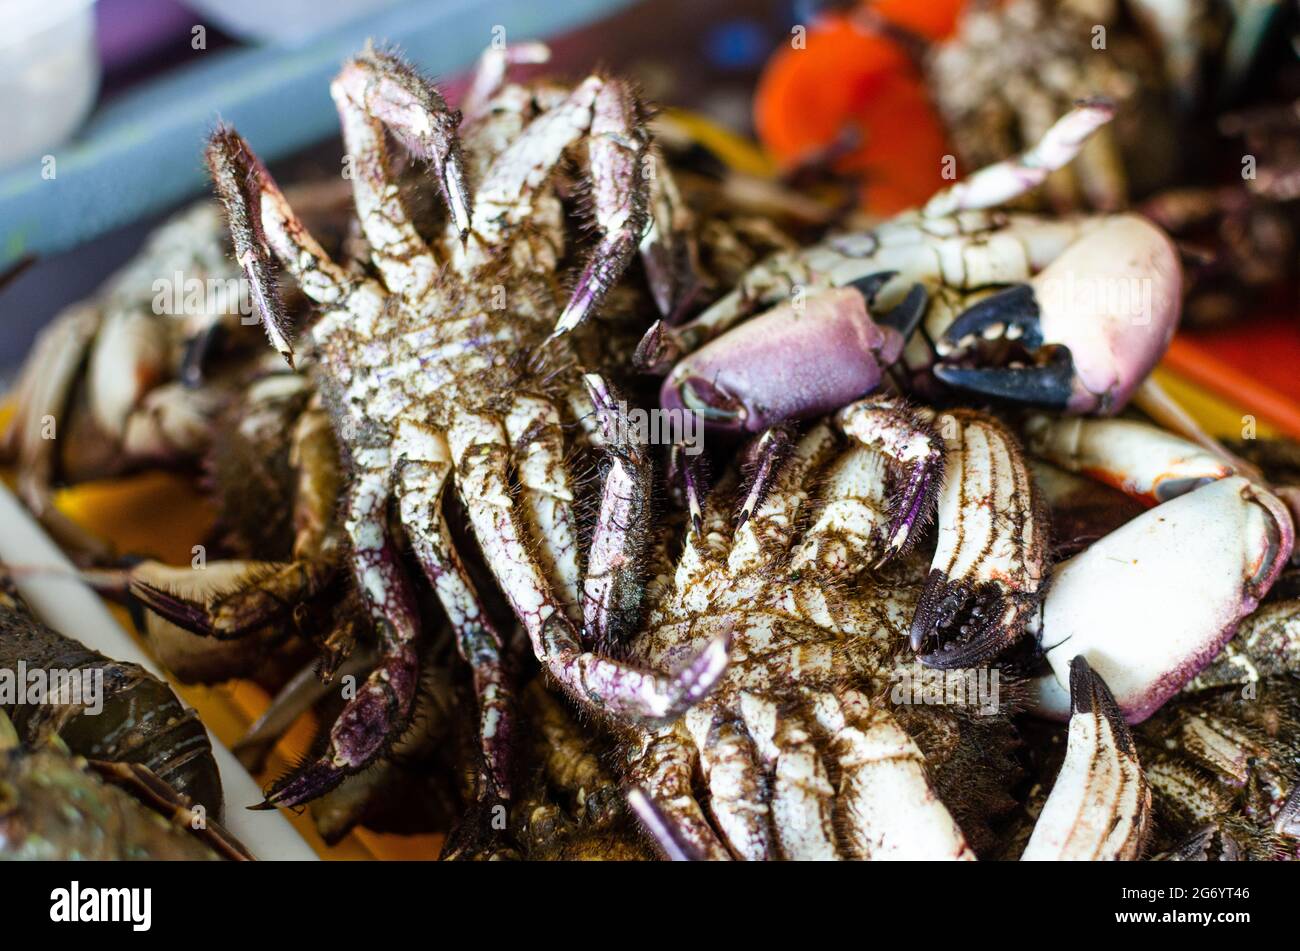 Large group of alive sea crabs bundled for sale at supermarket. Stock Photo